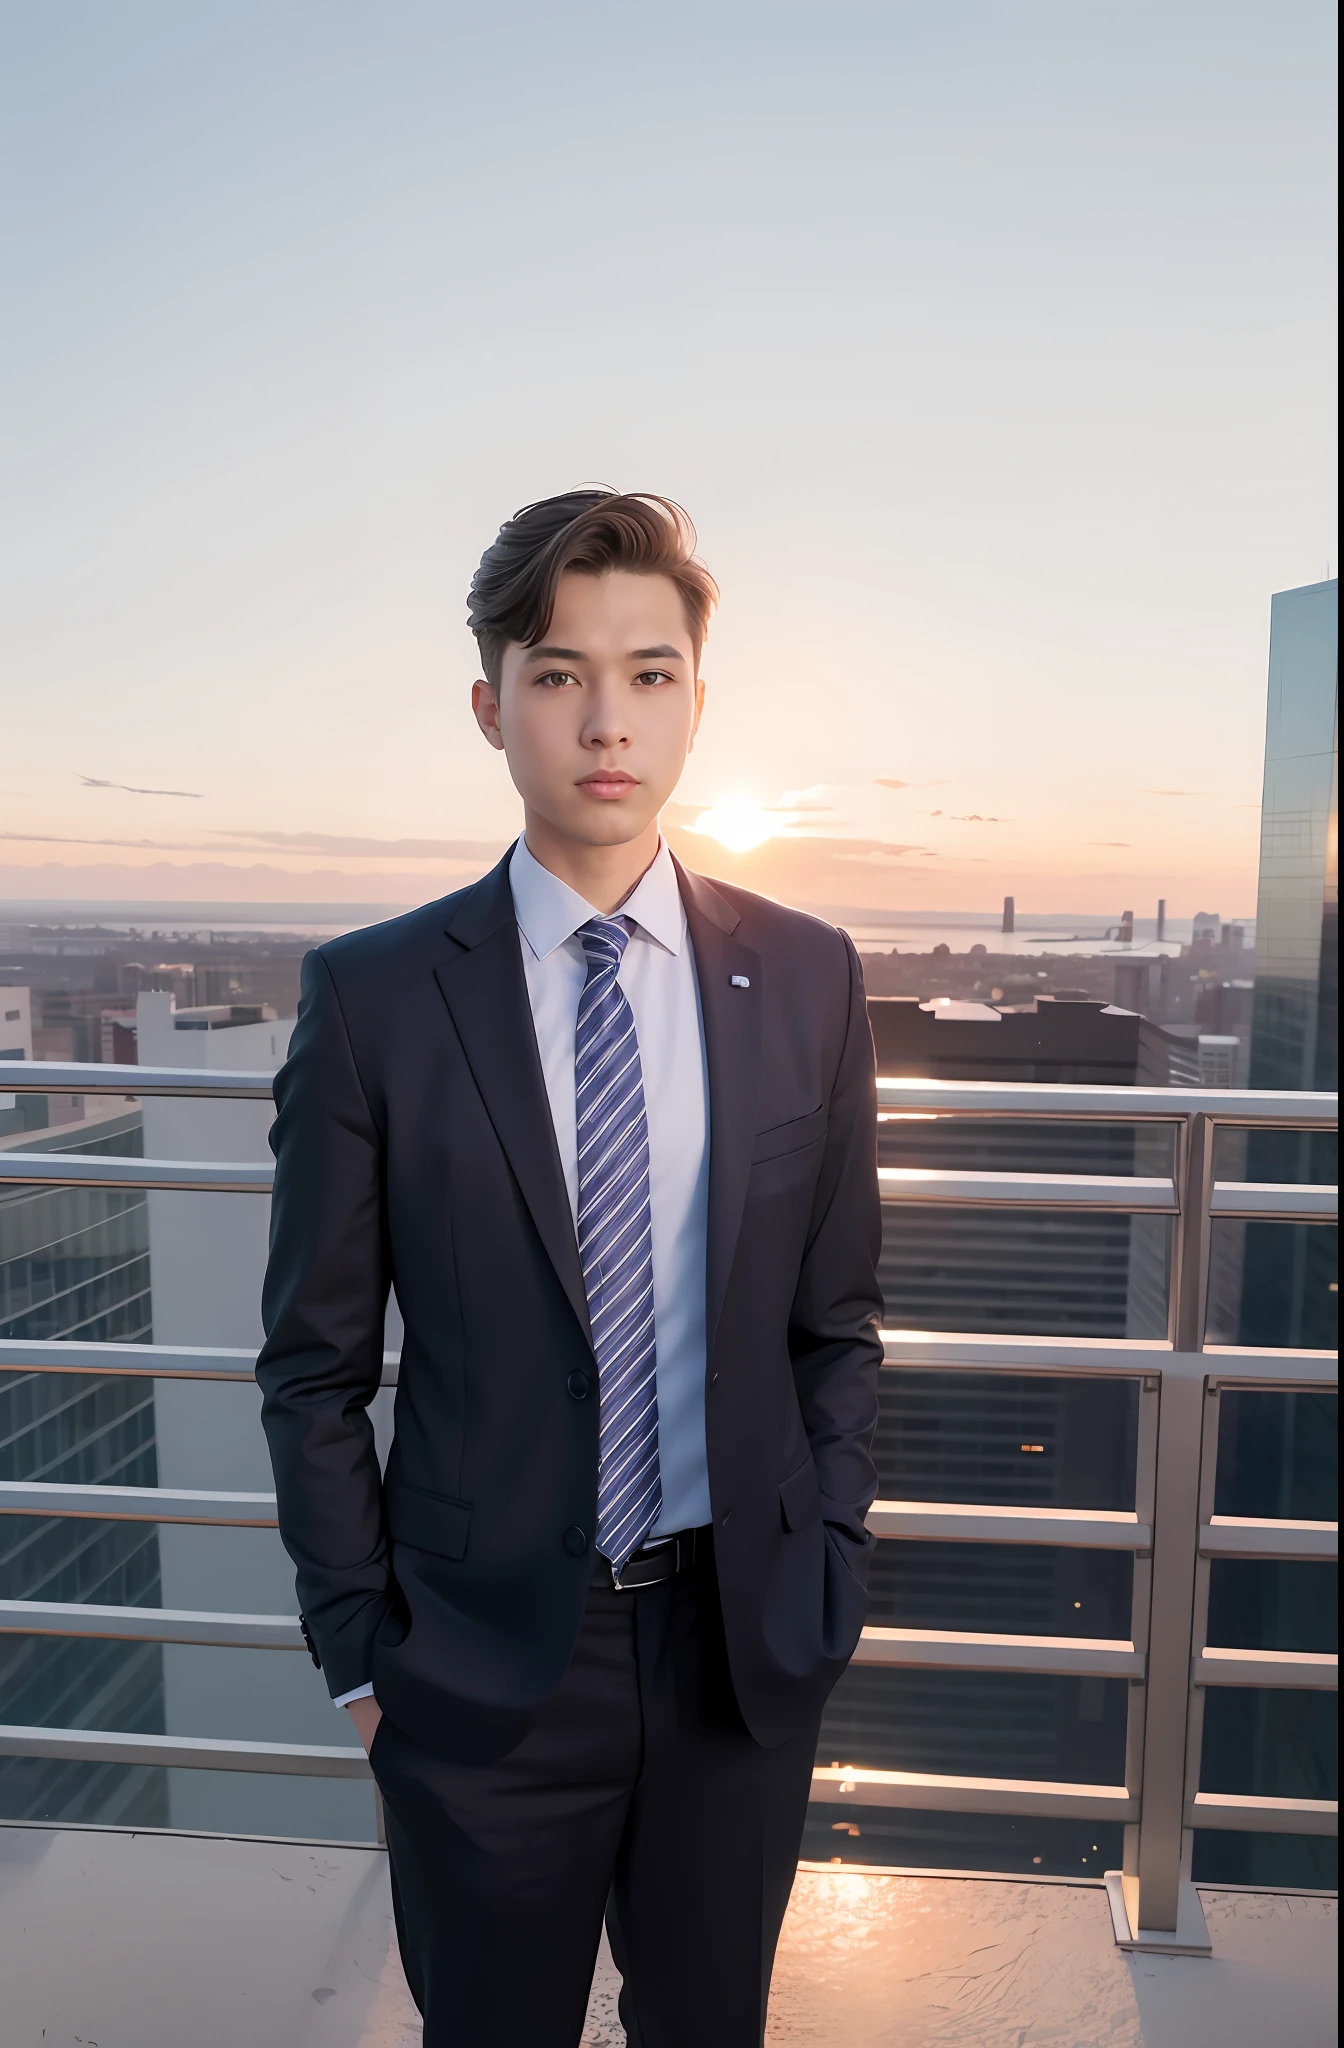 1boys,Solo, parted lip,  Office Man, Business suit ,
skylines, Cloud,Sunset, arms behind  head, view the viewer,